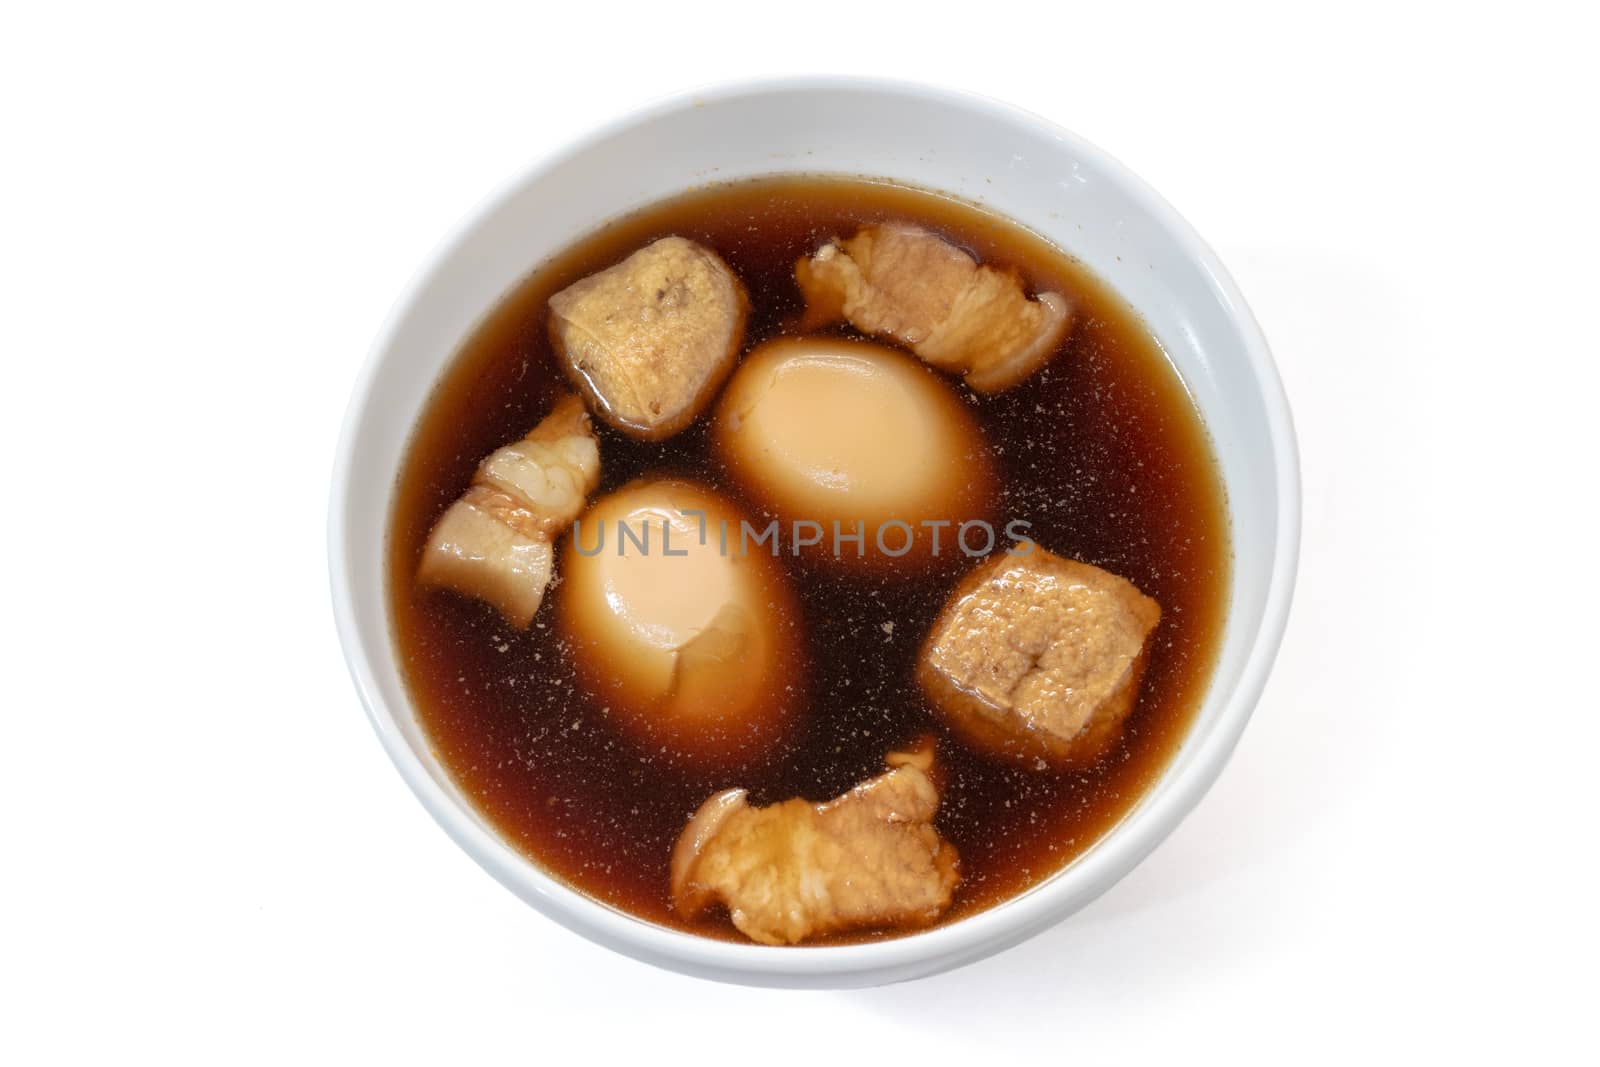 The close up of Thai egg and pork in sweet brown sauce food in white bowl on white background.